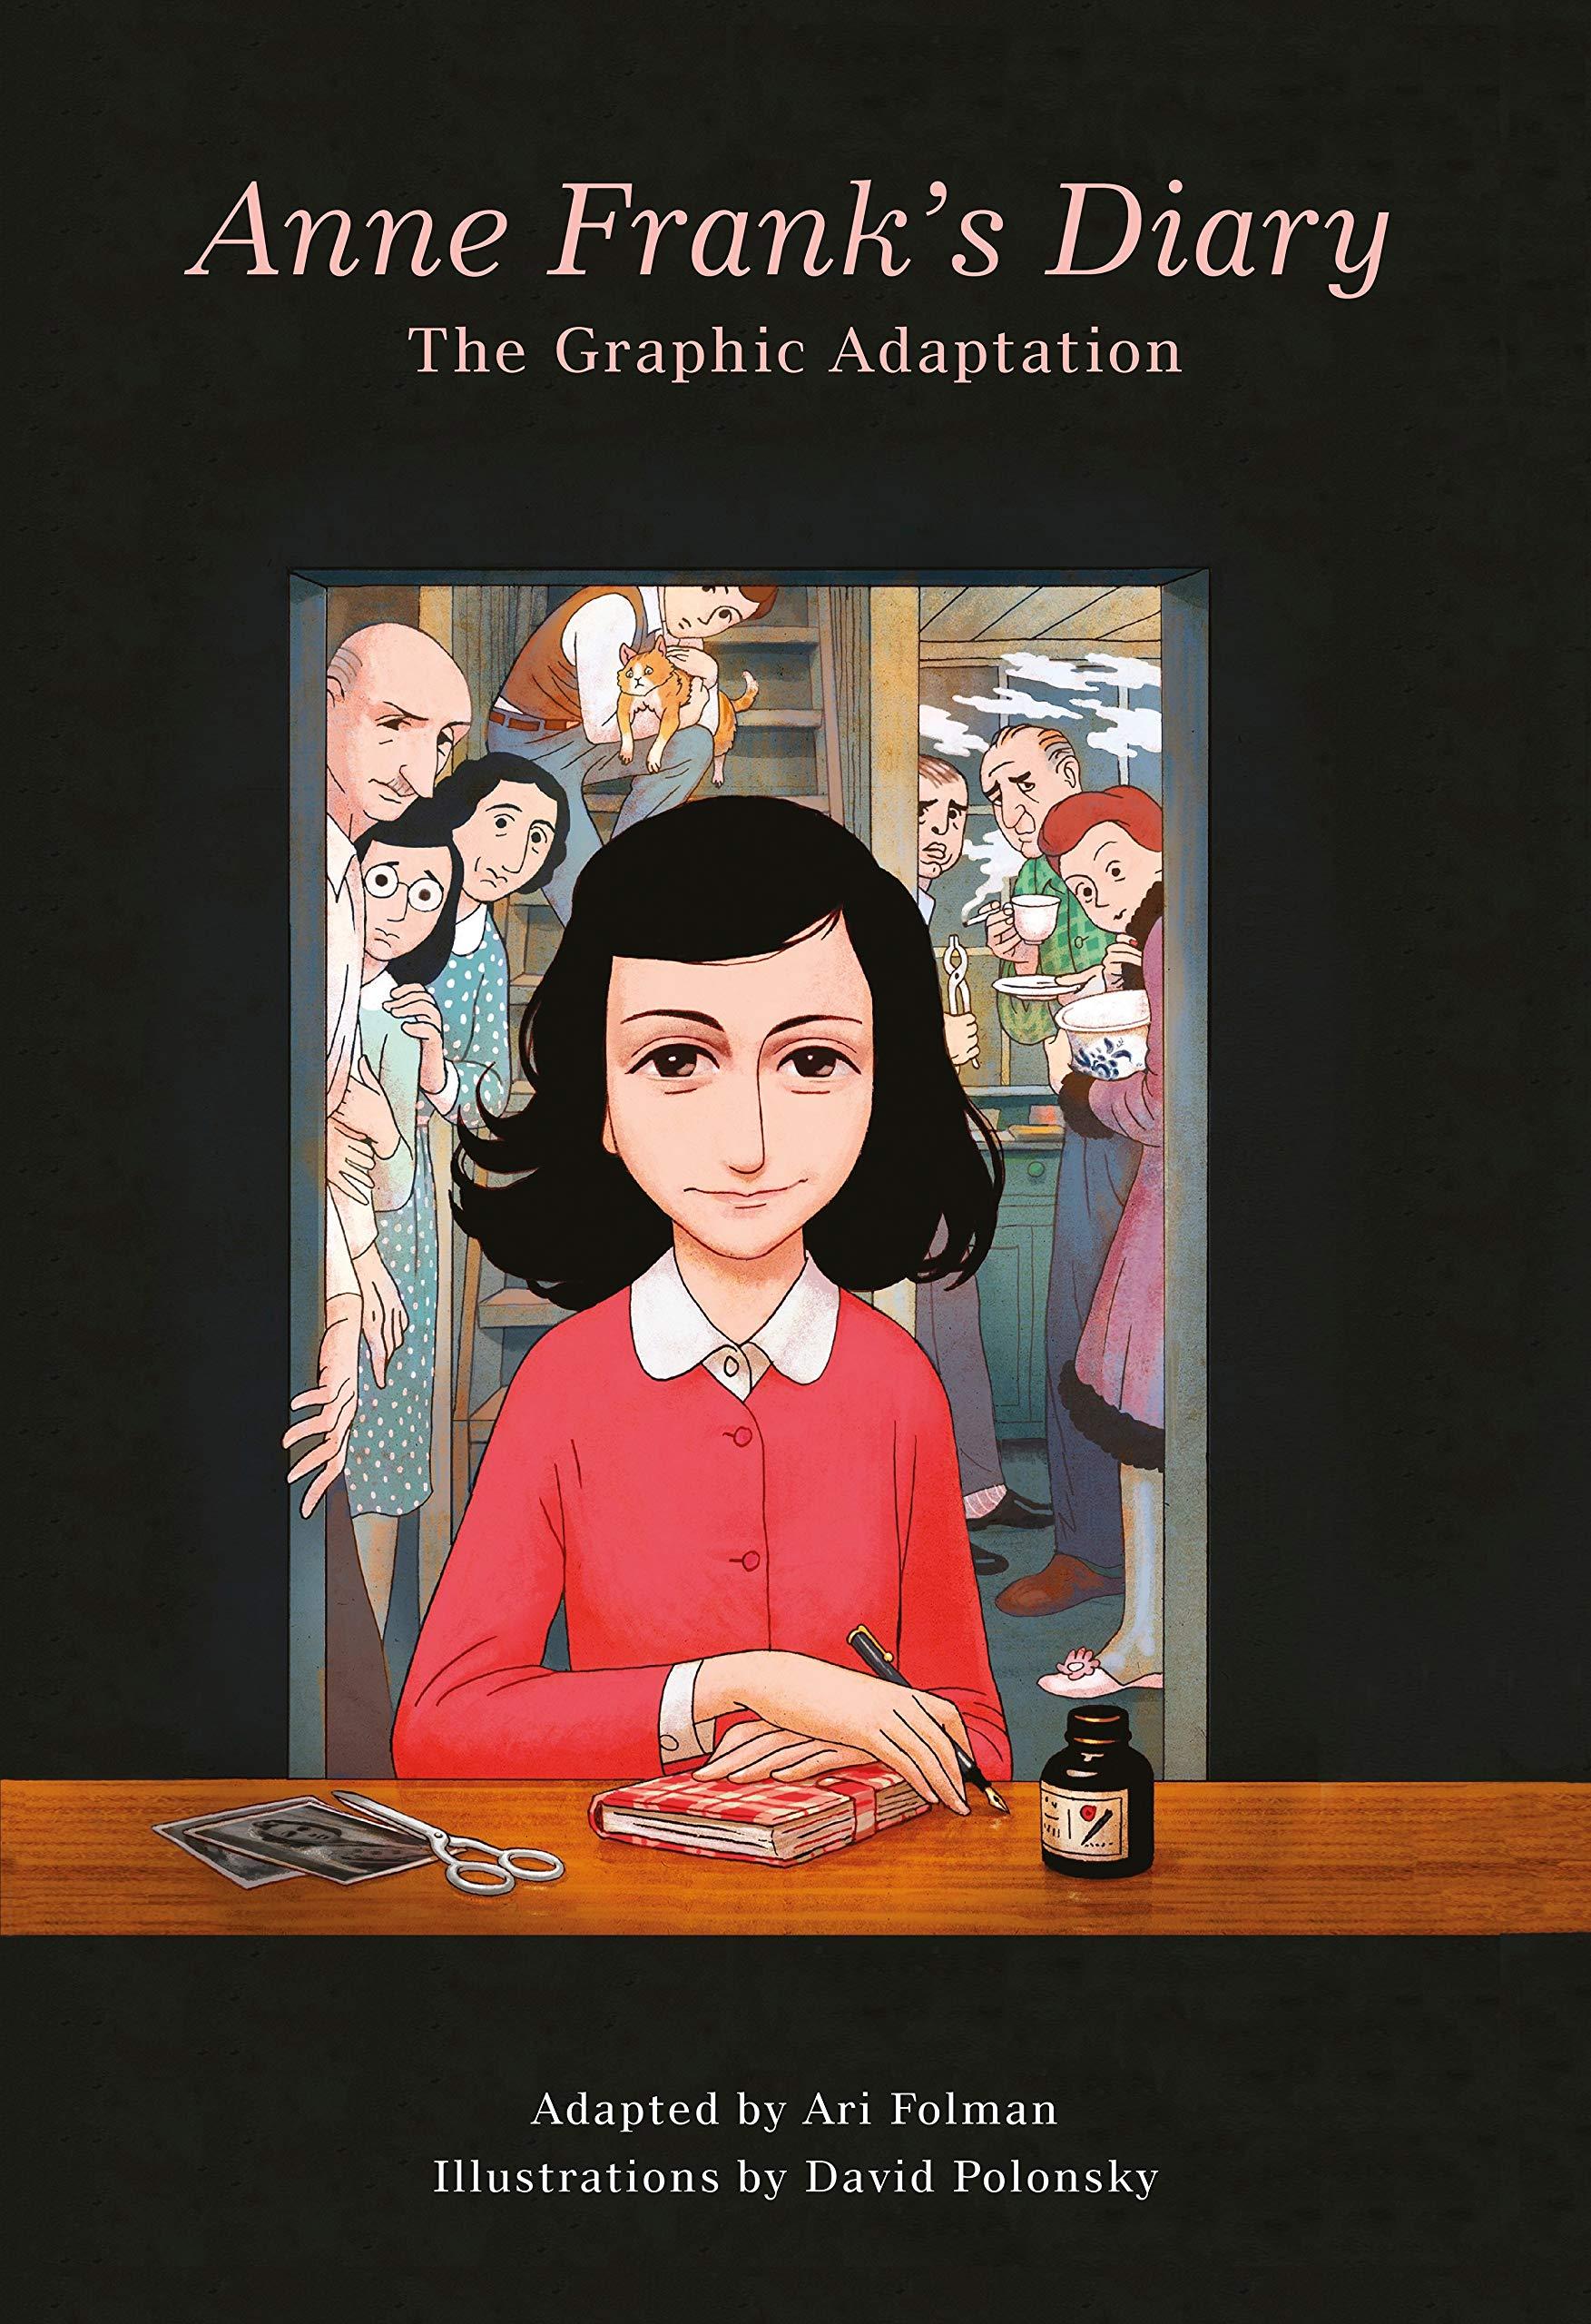 Anne Frank's Diary. The Graphic Adaptation